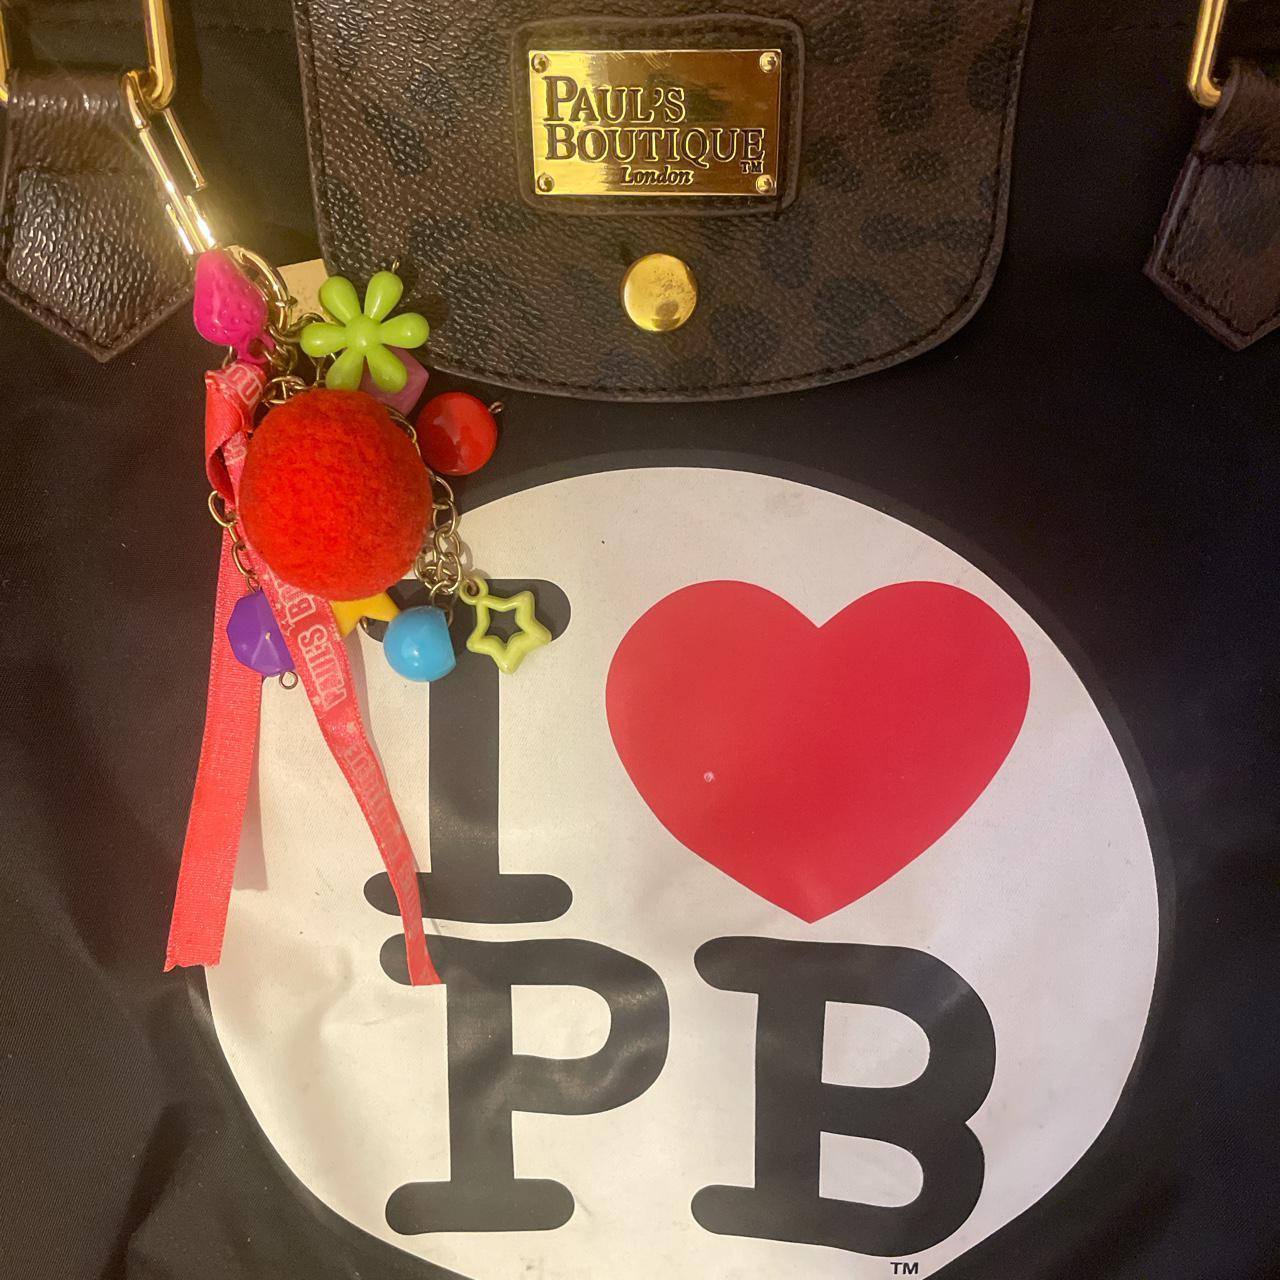 My pauls boutique bag<3, eeep this came today i love it wel…